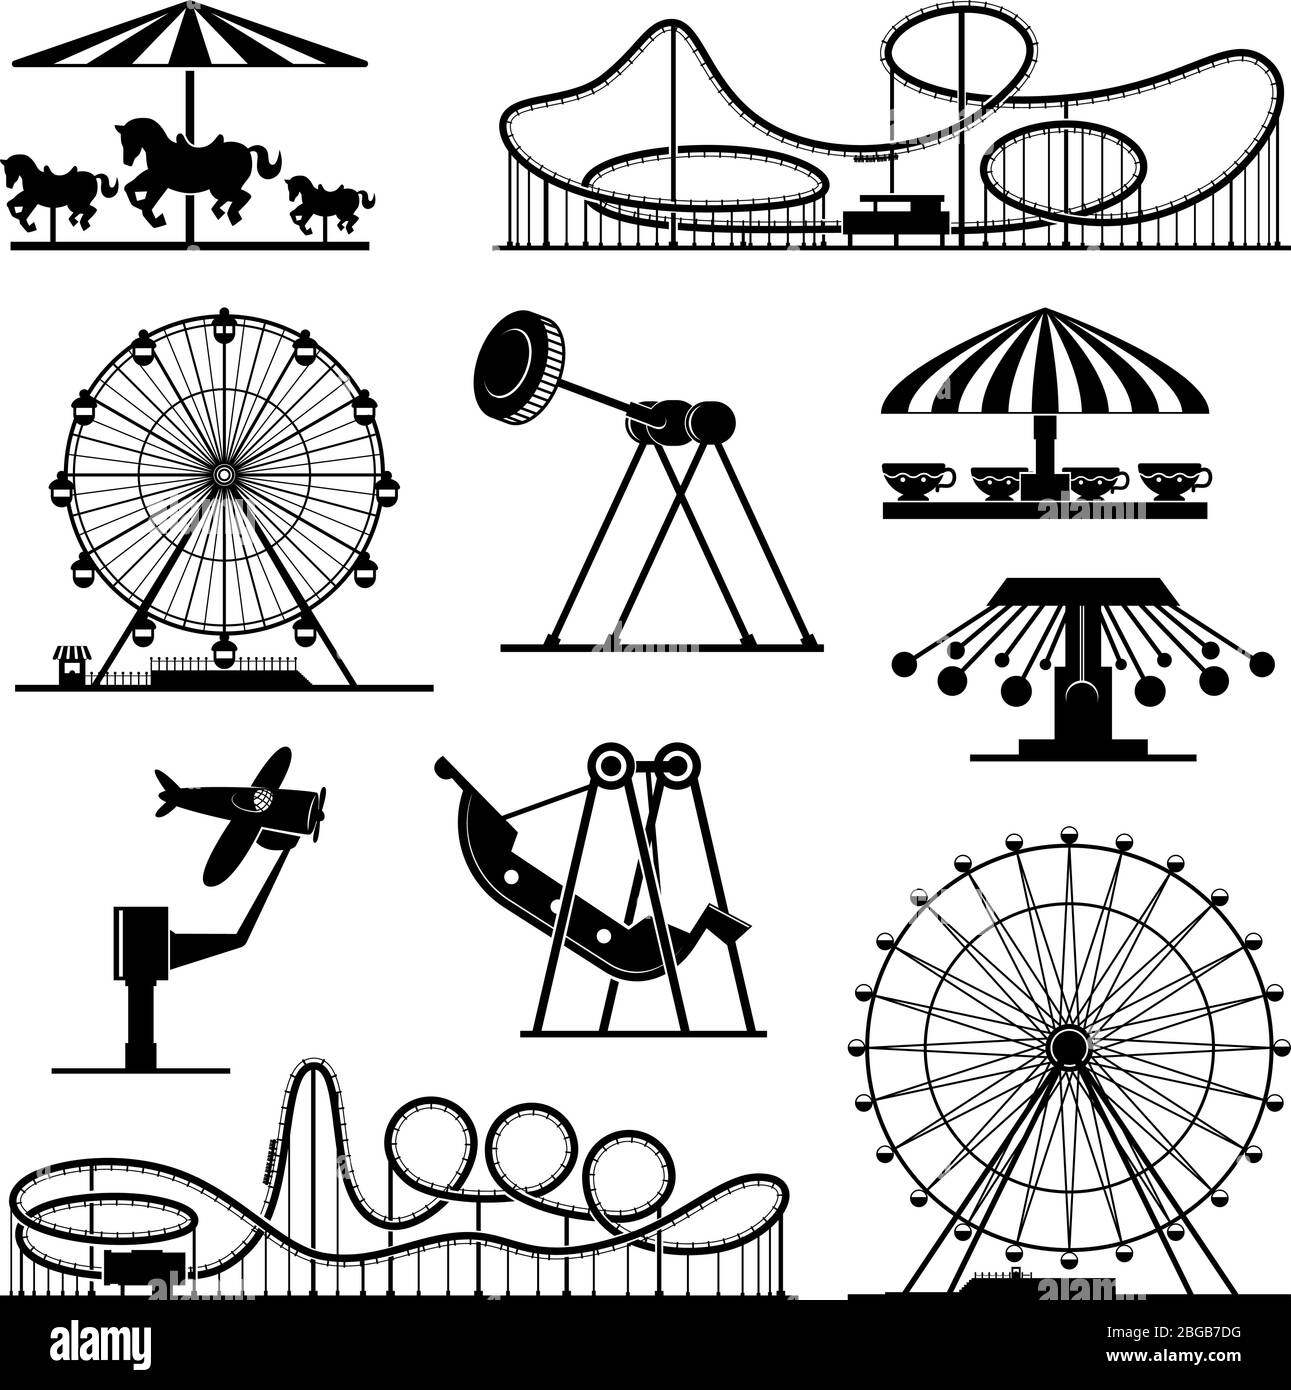 Learn How to Draw an Amusement Park with Rides Step by Step | How to Draw  Carnival Rides - YouTube